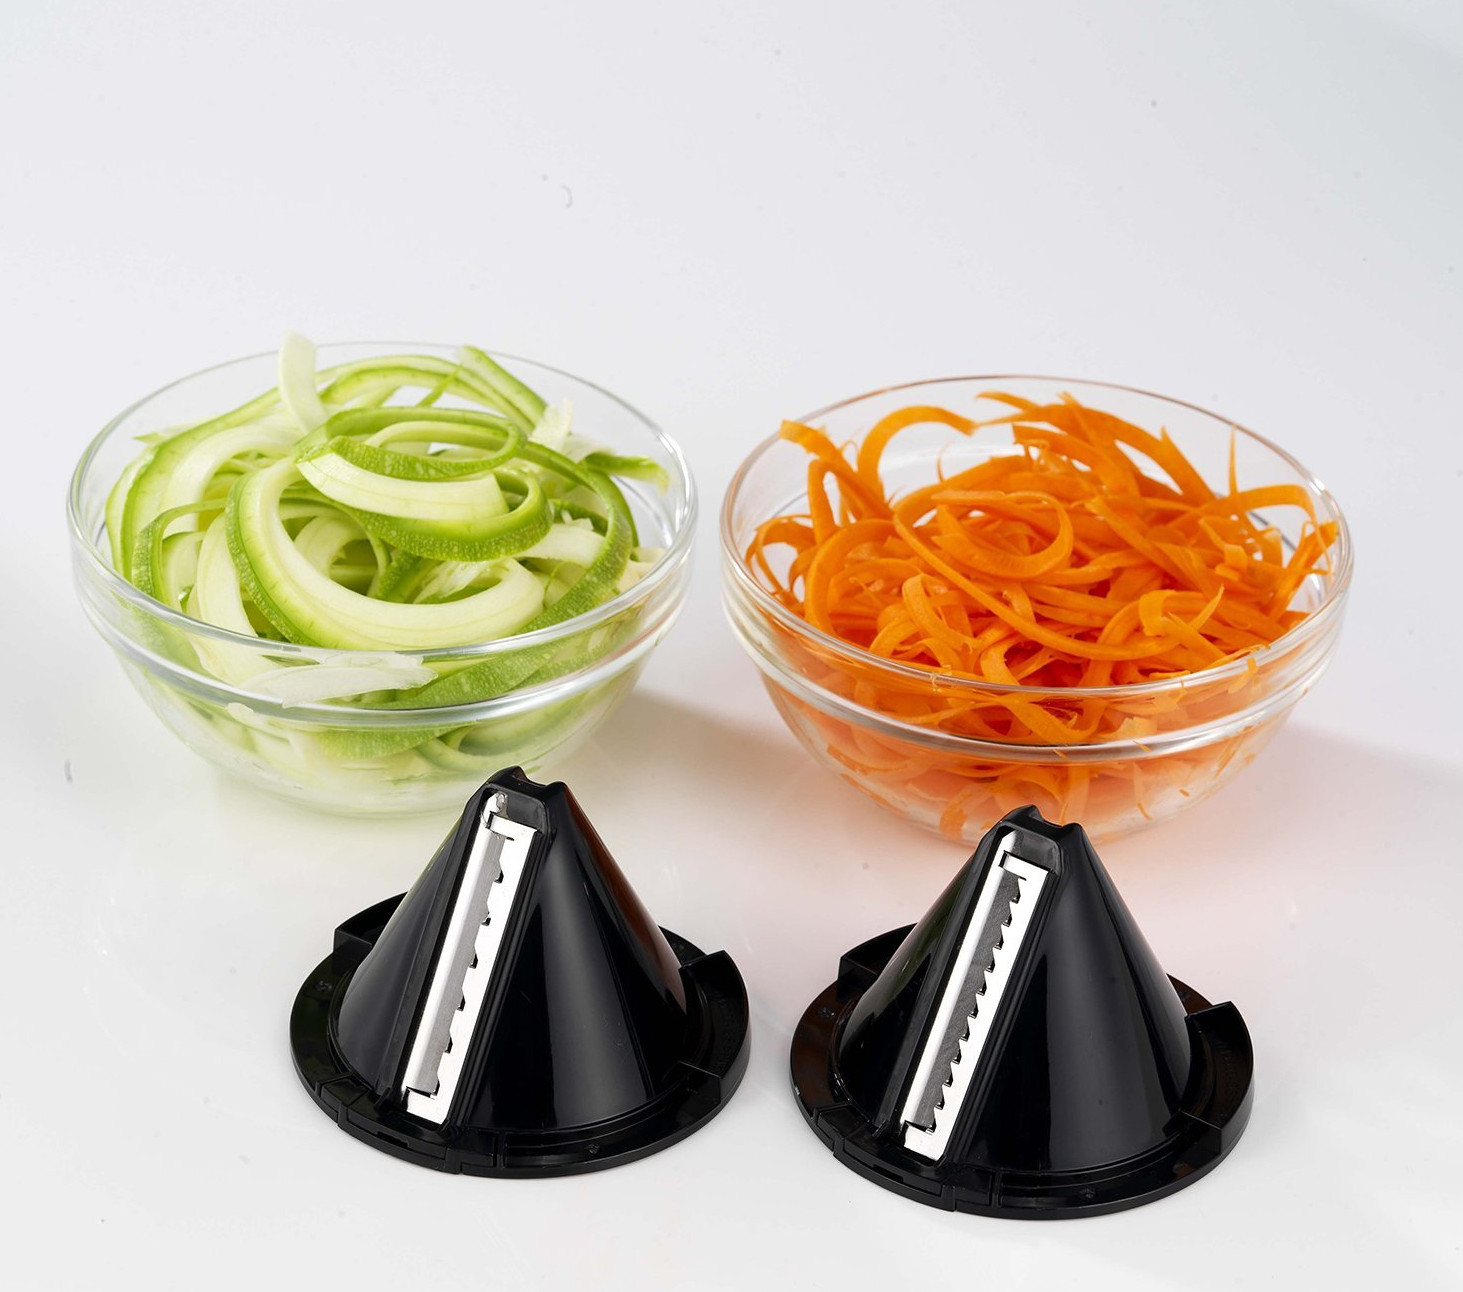 Some of the veg produced by the Morphy Richards 432020 Electric Spiralizer